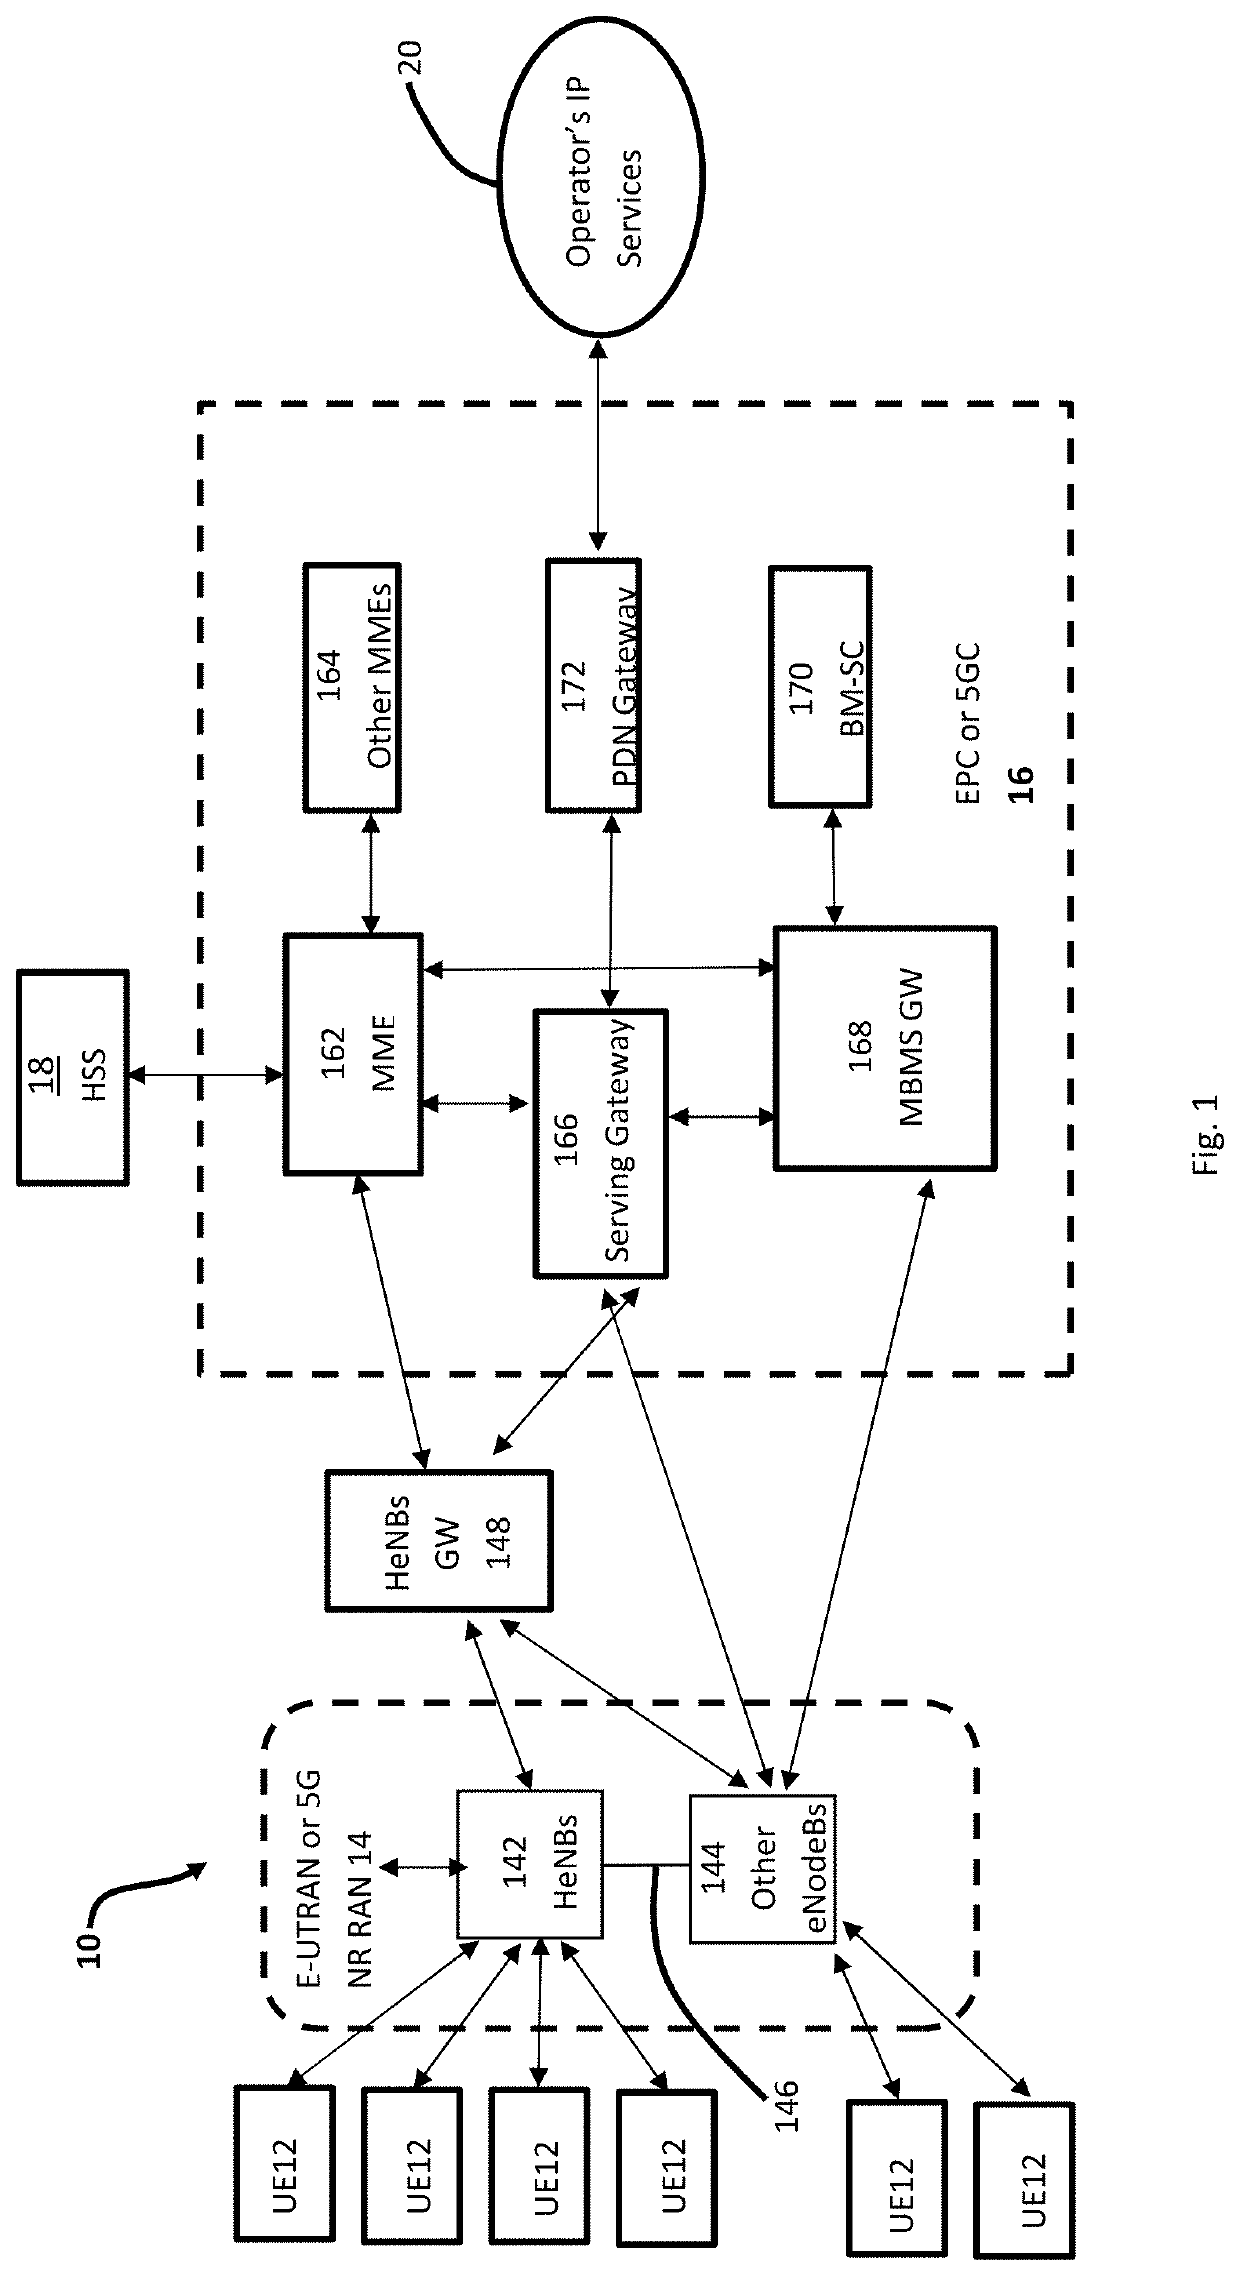 Method of Reducing Uplink Inter-Cell Interference in a Cellular Communications Network